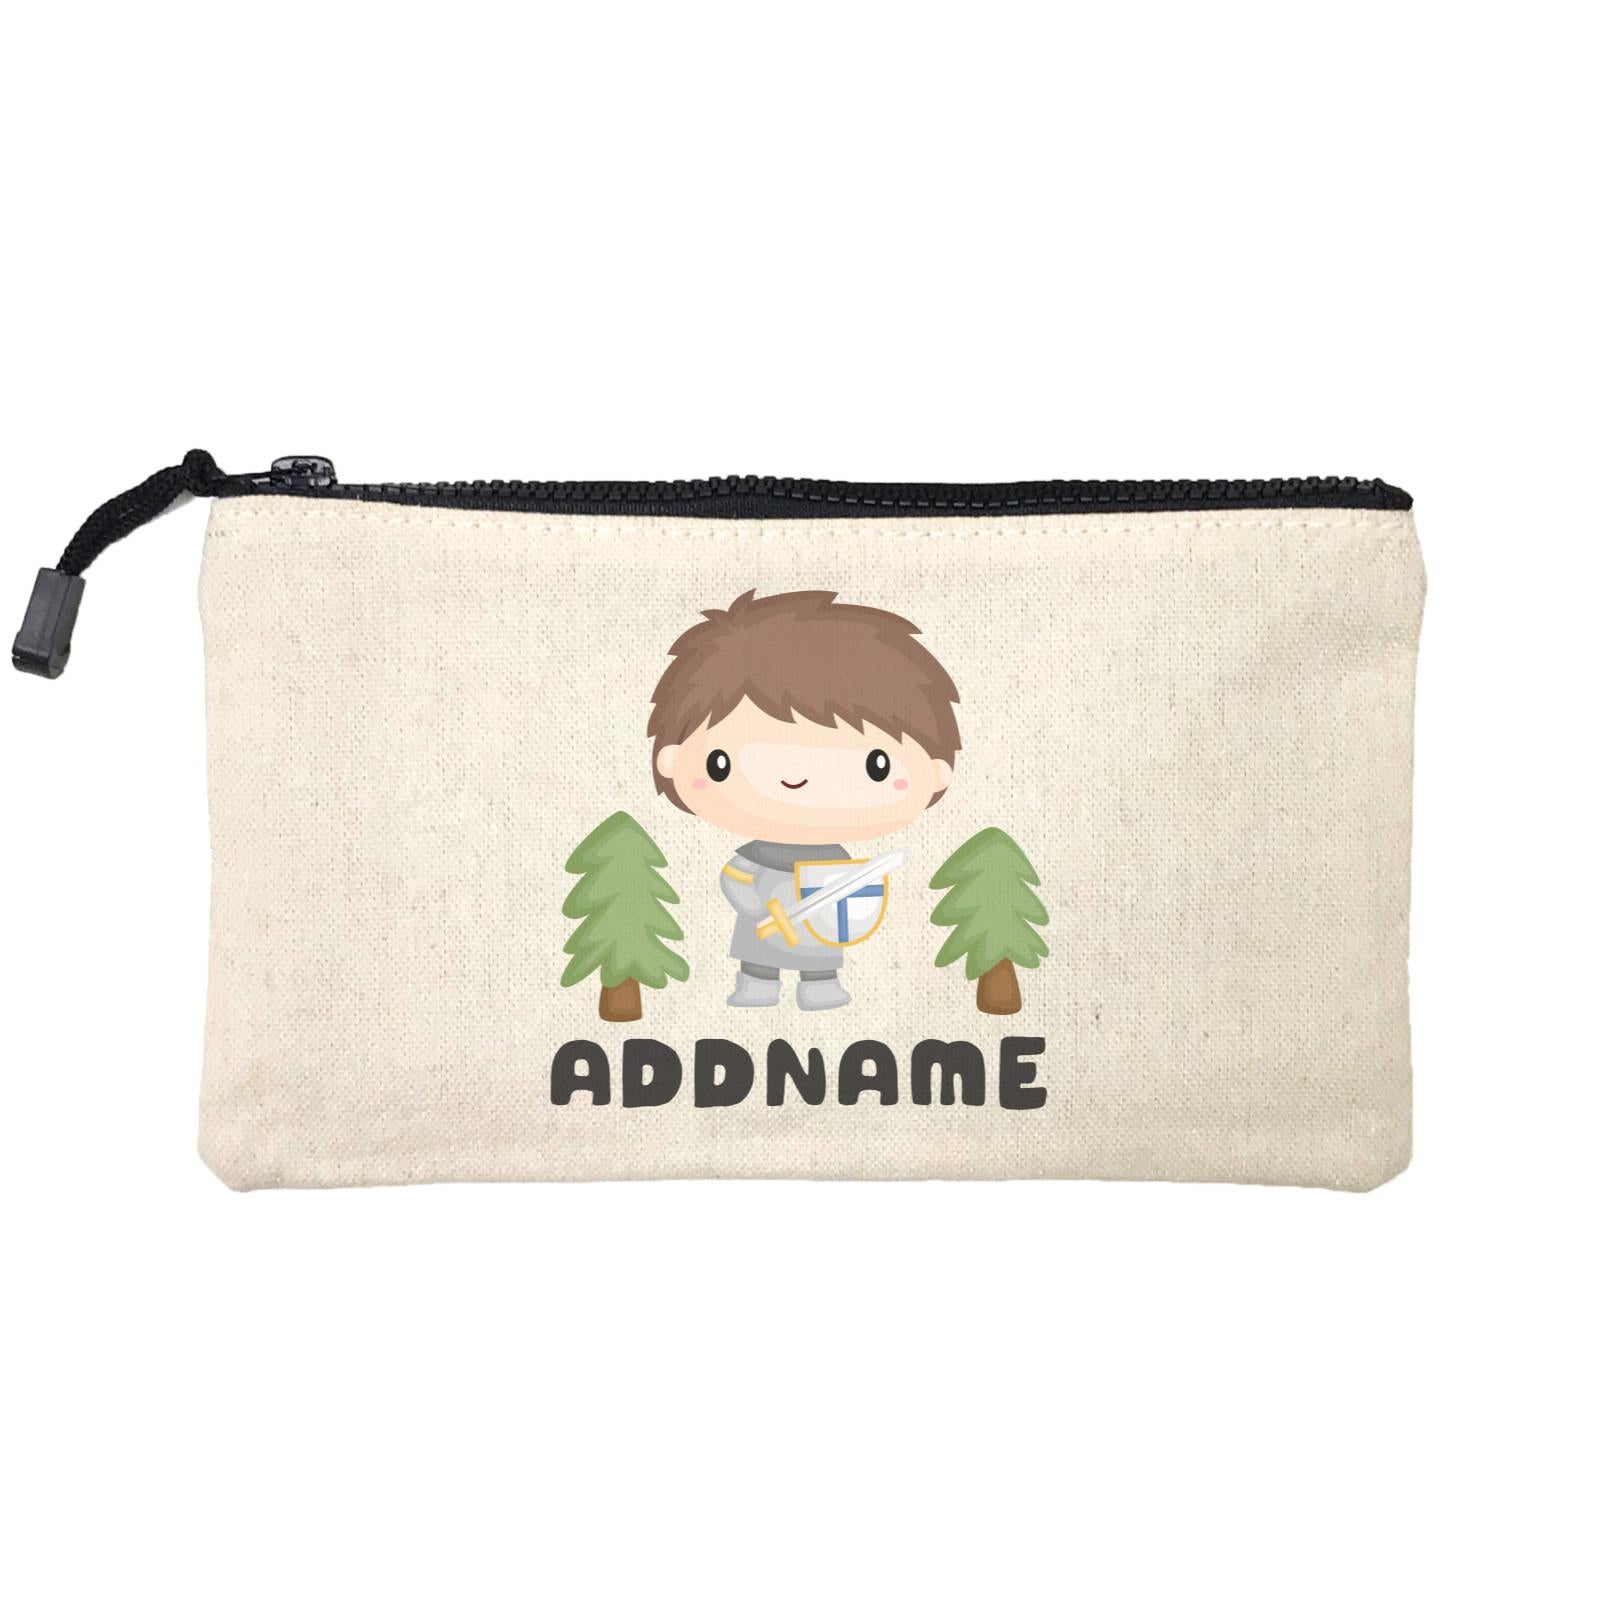 Birthday Royal Knight Boy Holding Sheild And Sword Addname Mini Accessories Stationery Pouch